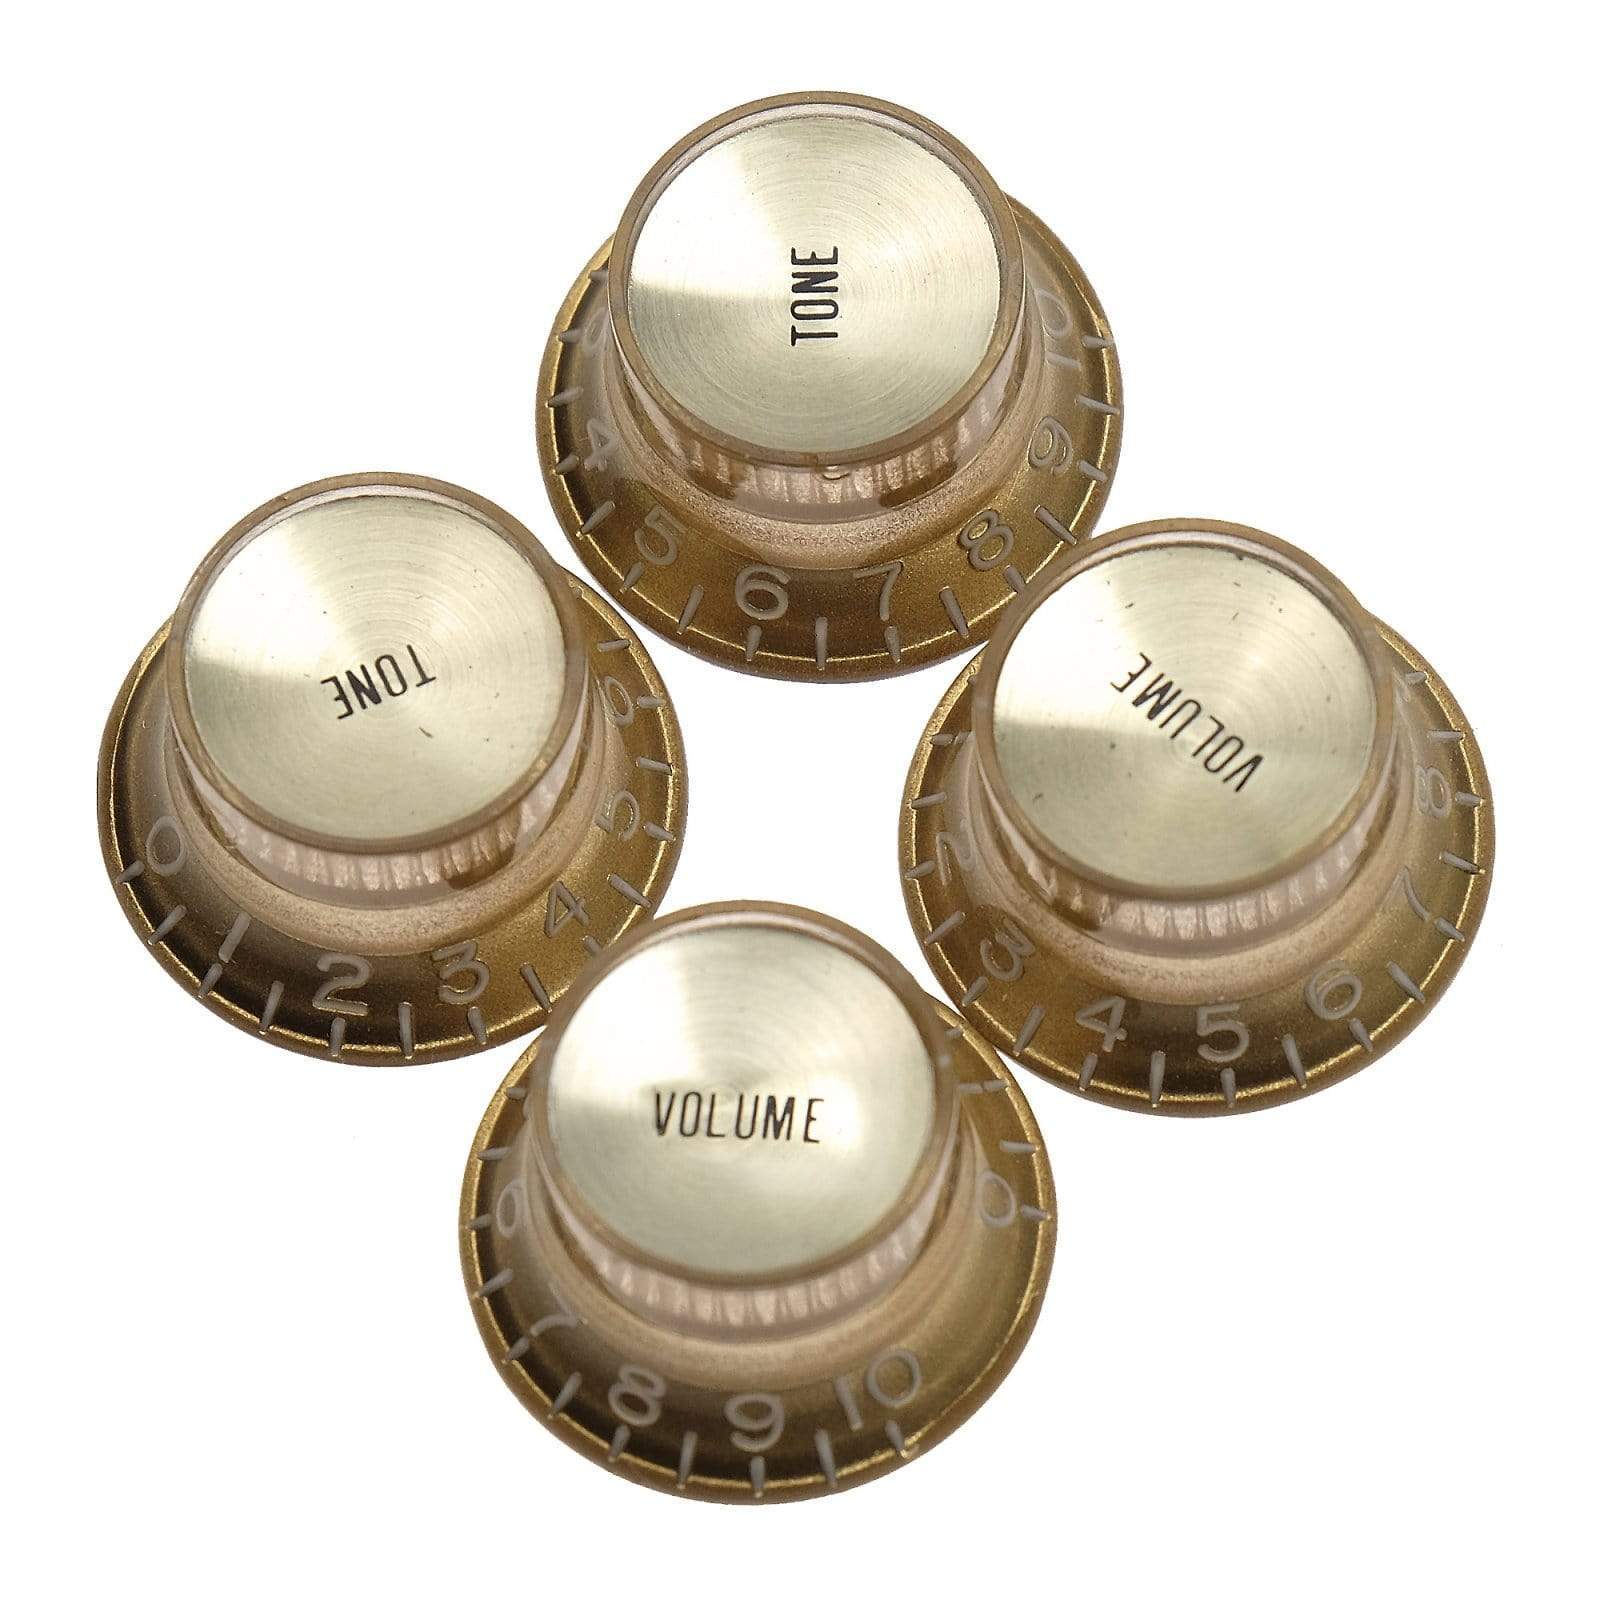 Gibson Top Hat Knobs w/ Gold Metal Insert (2 Volume, 2 Tone) - Gold Parts / Knobs